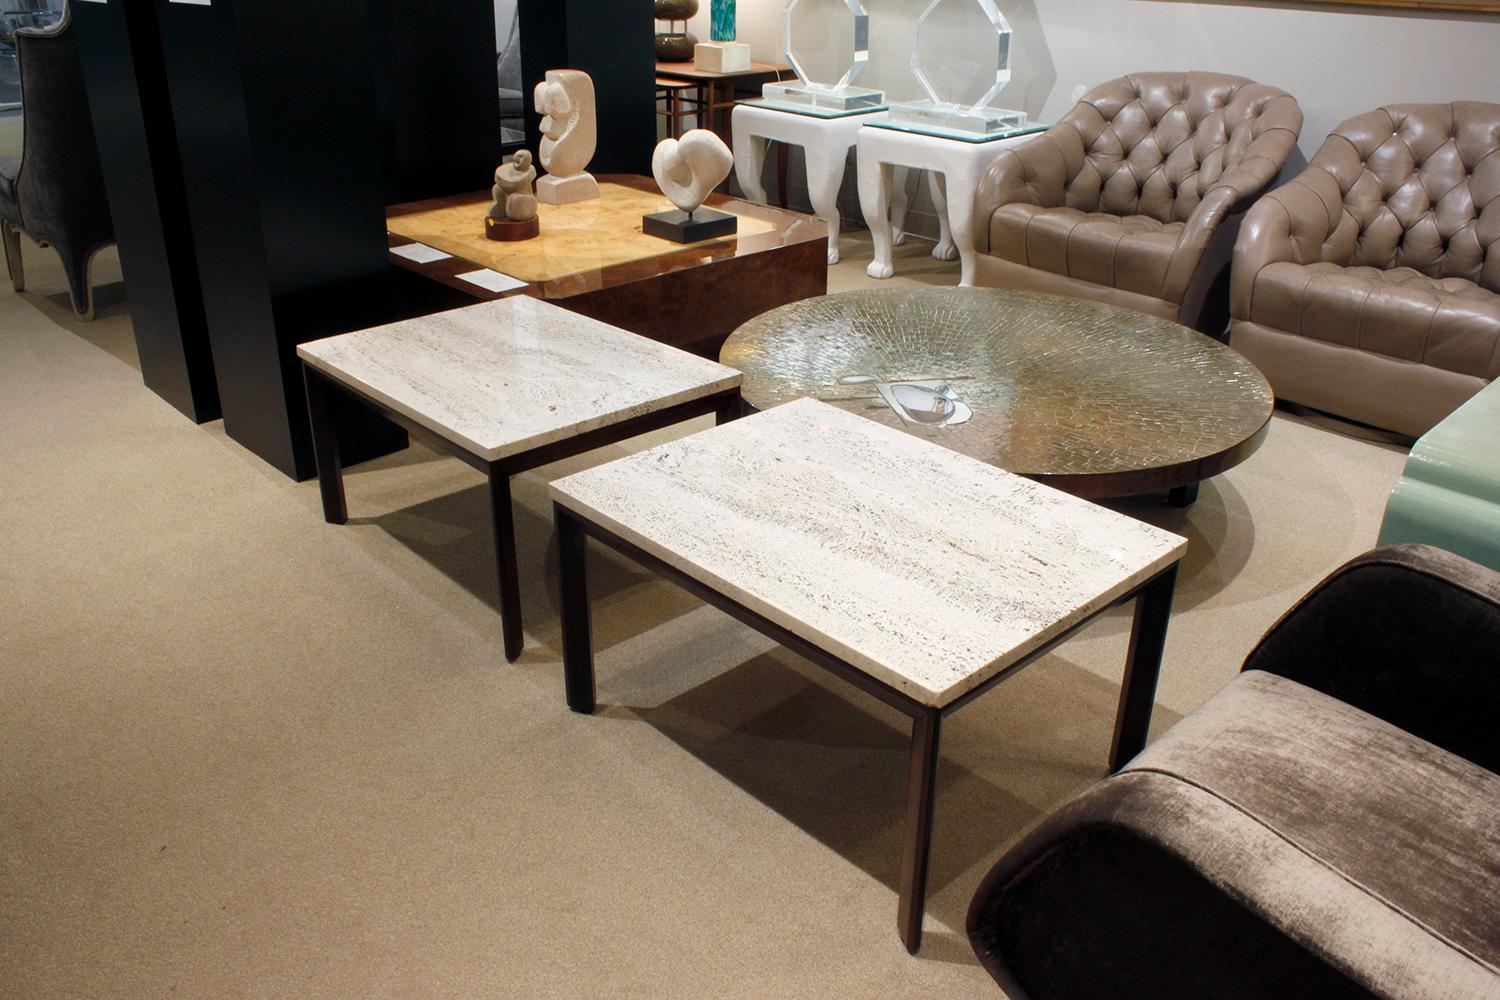 Mid-20th Century Pair of Angular Leg Coffee Tables with Travertine Tops, 1950s For Sale